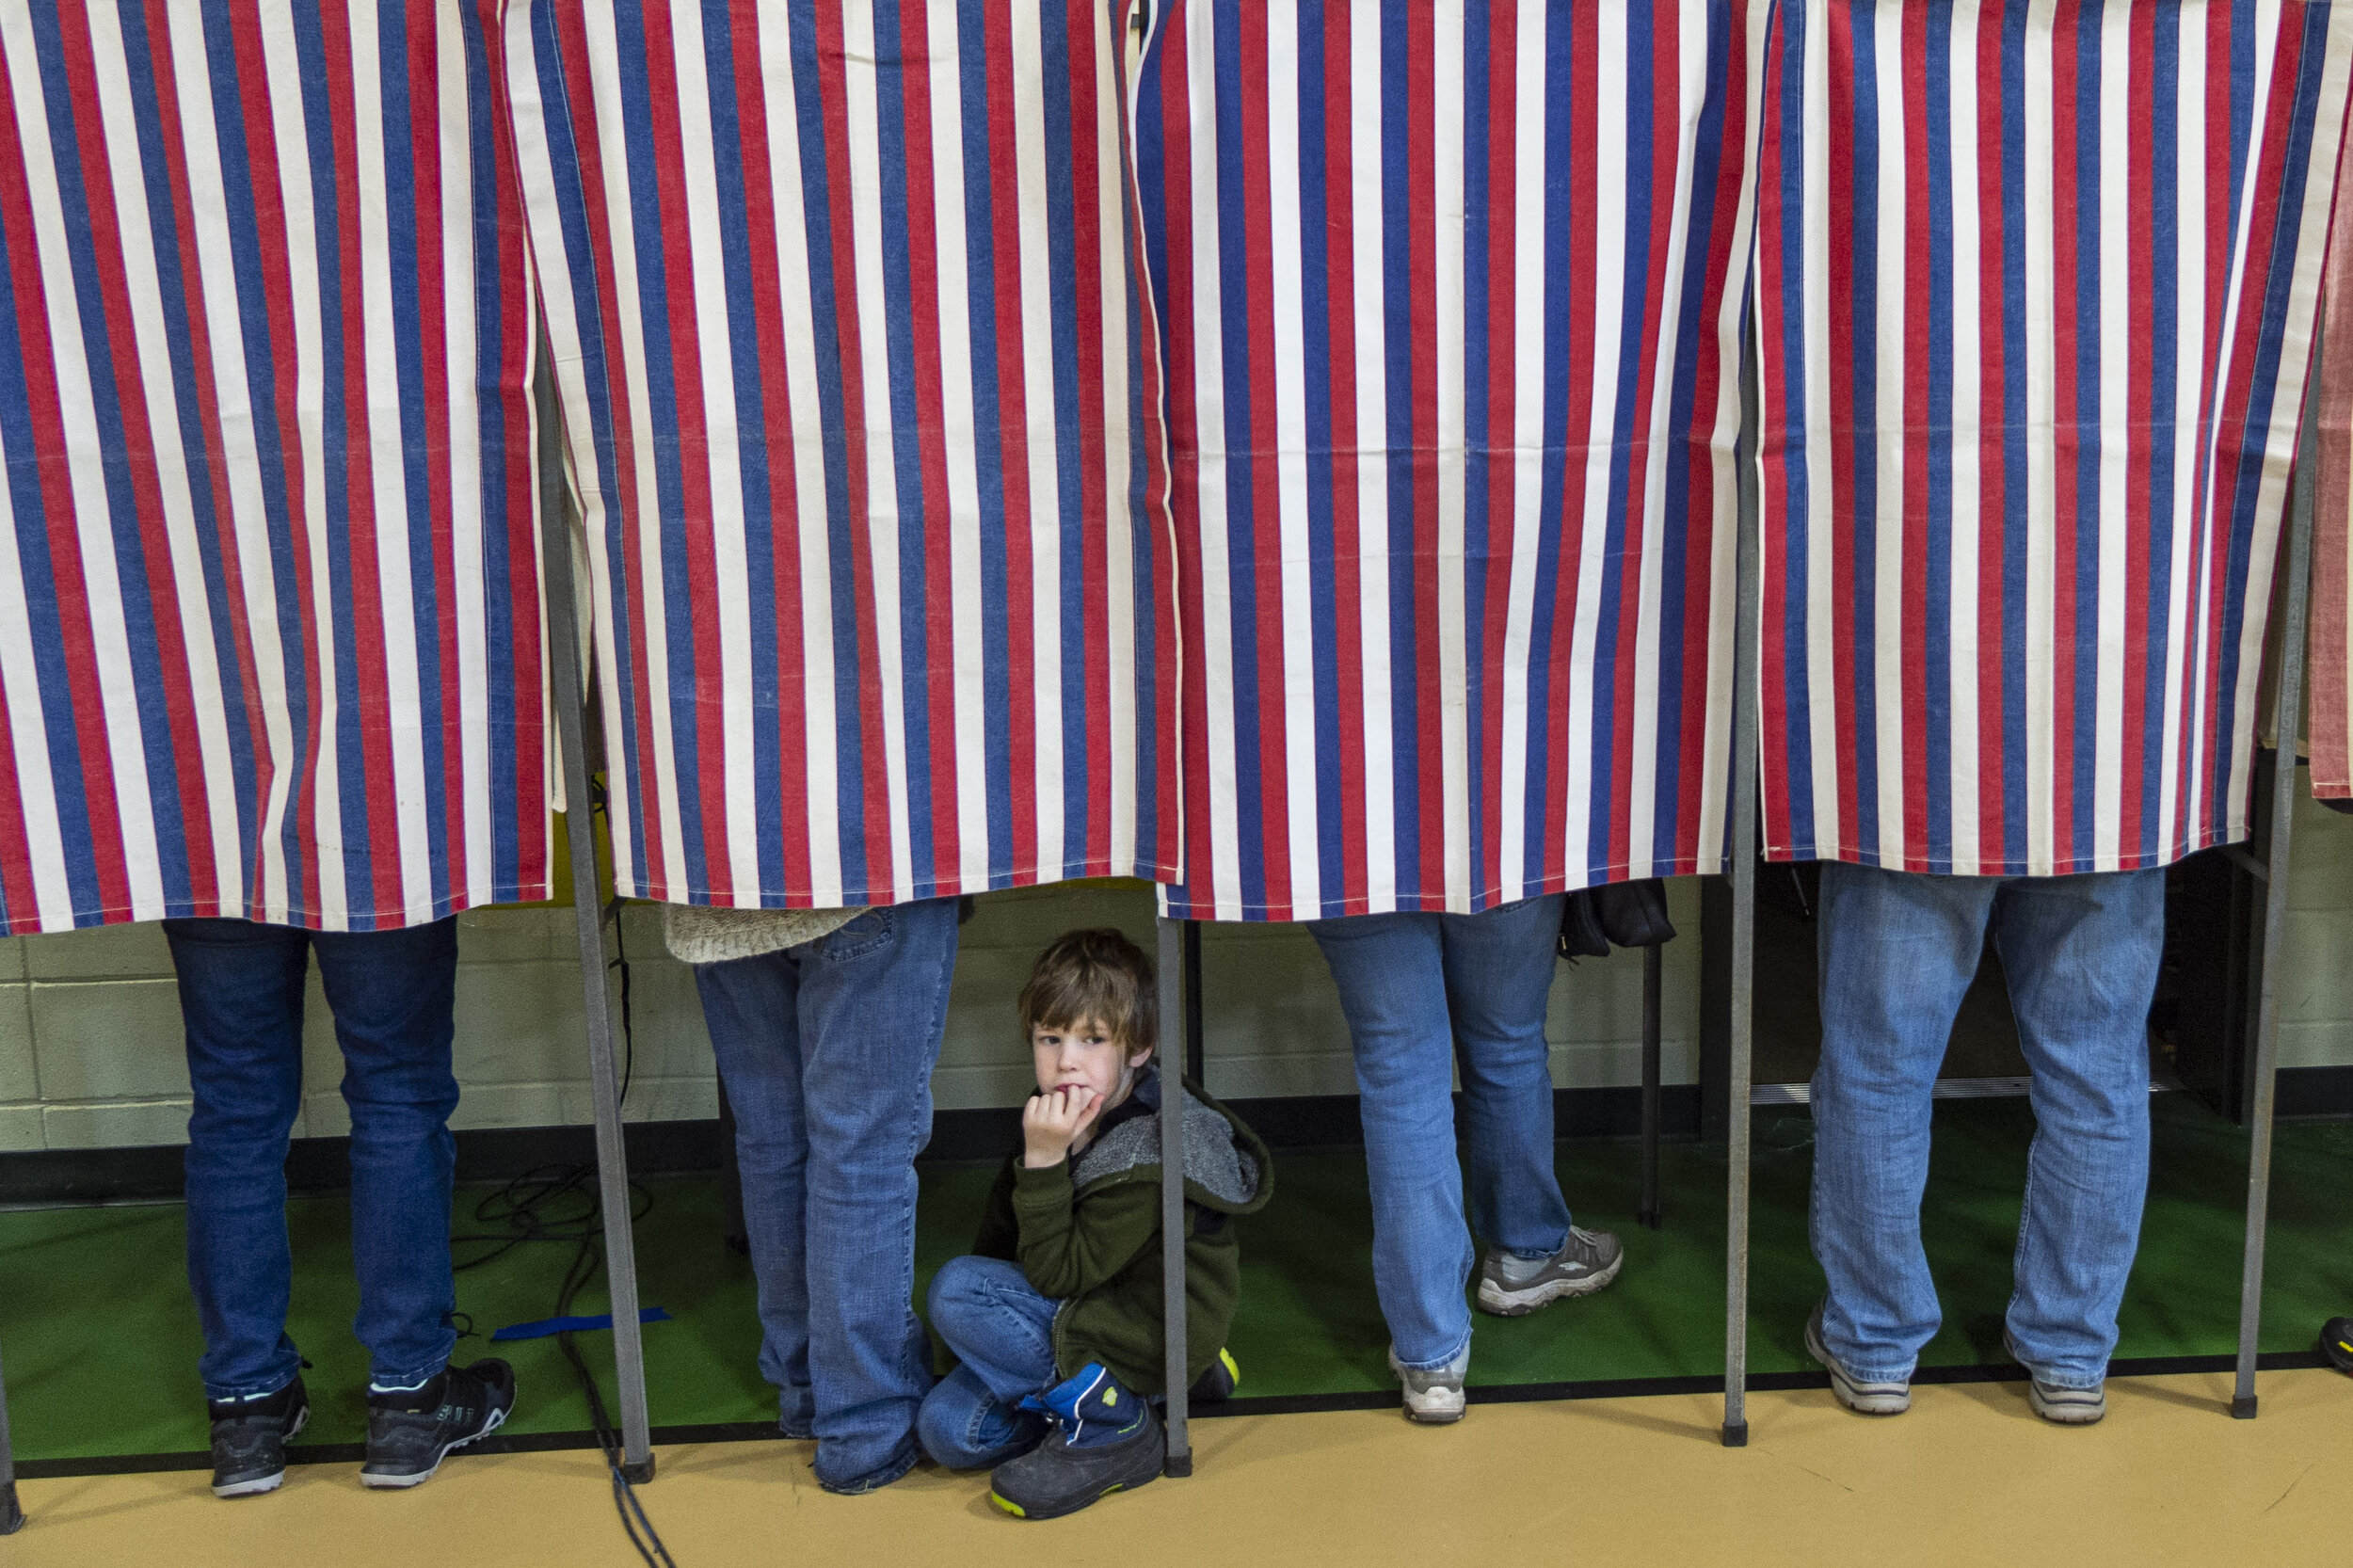  Eli Buschey, 6, joining his grandmother Kathryn as she casts her ballot, peeks out from the voting booth at Berlin Elementary School on “Super” Tuesday, March 3rd 2020. 